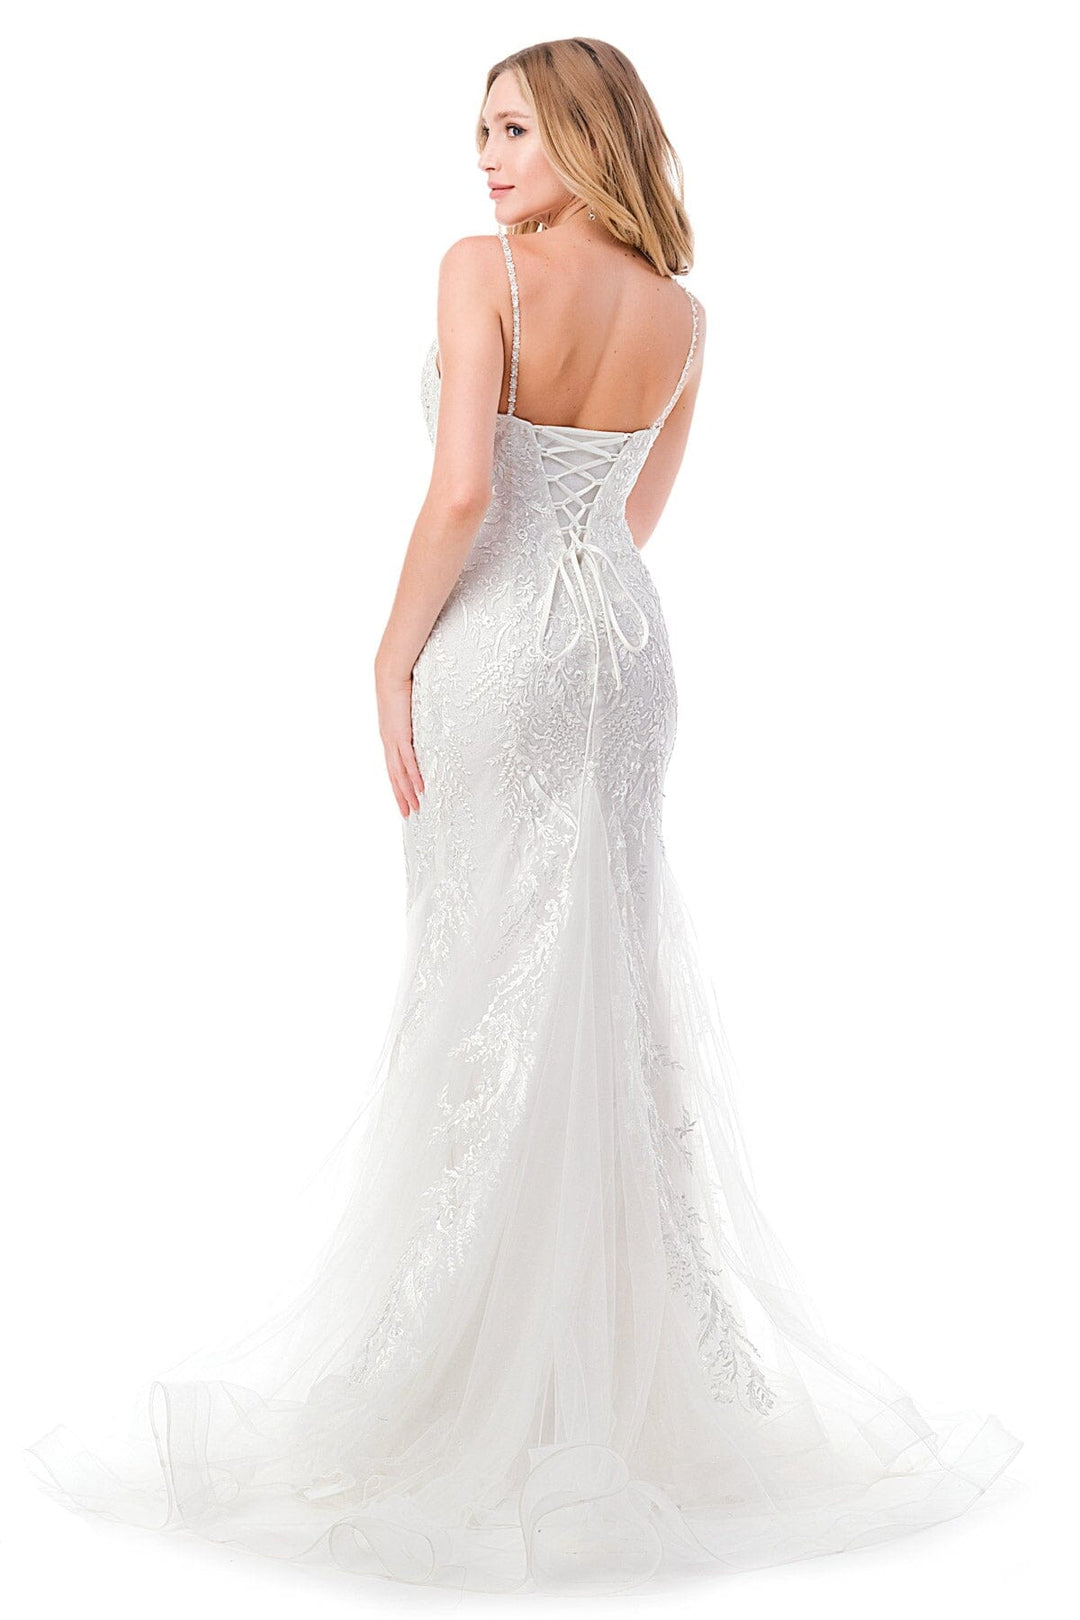 Embroidered Sleeveless Mermaid Bridal Gown by Coya MS0023